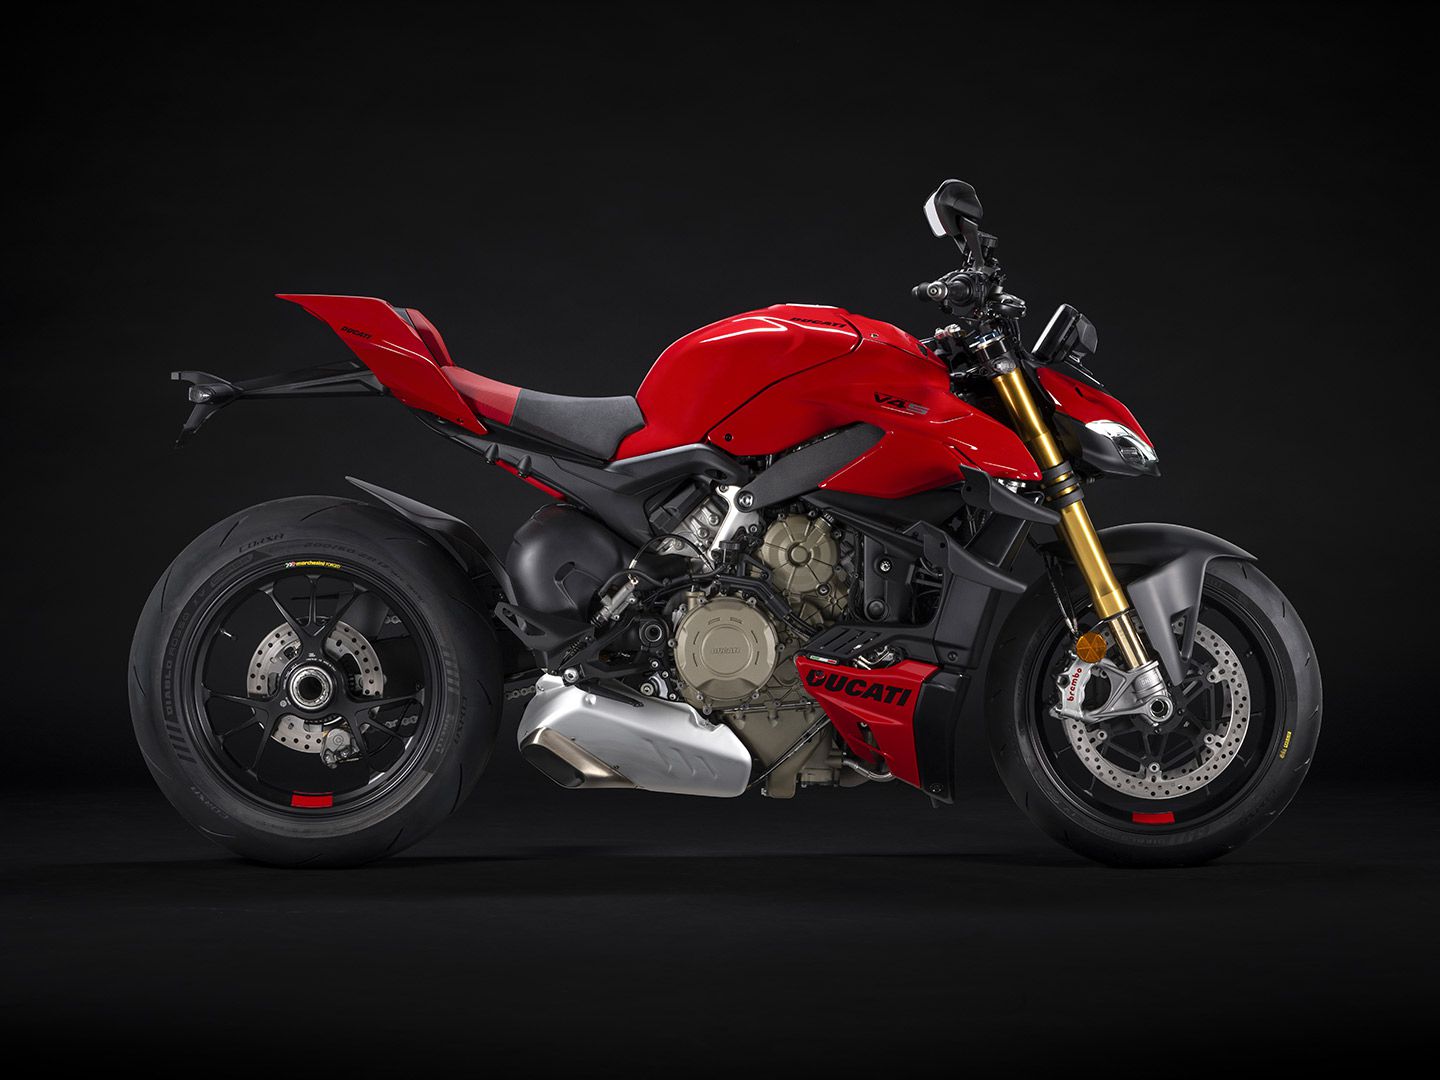 The 2023 Ducati Streetfighter V4 S. Upgrades over the standard model include Öhlins suspension suspension and forged wheels.